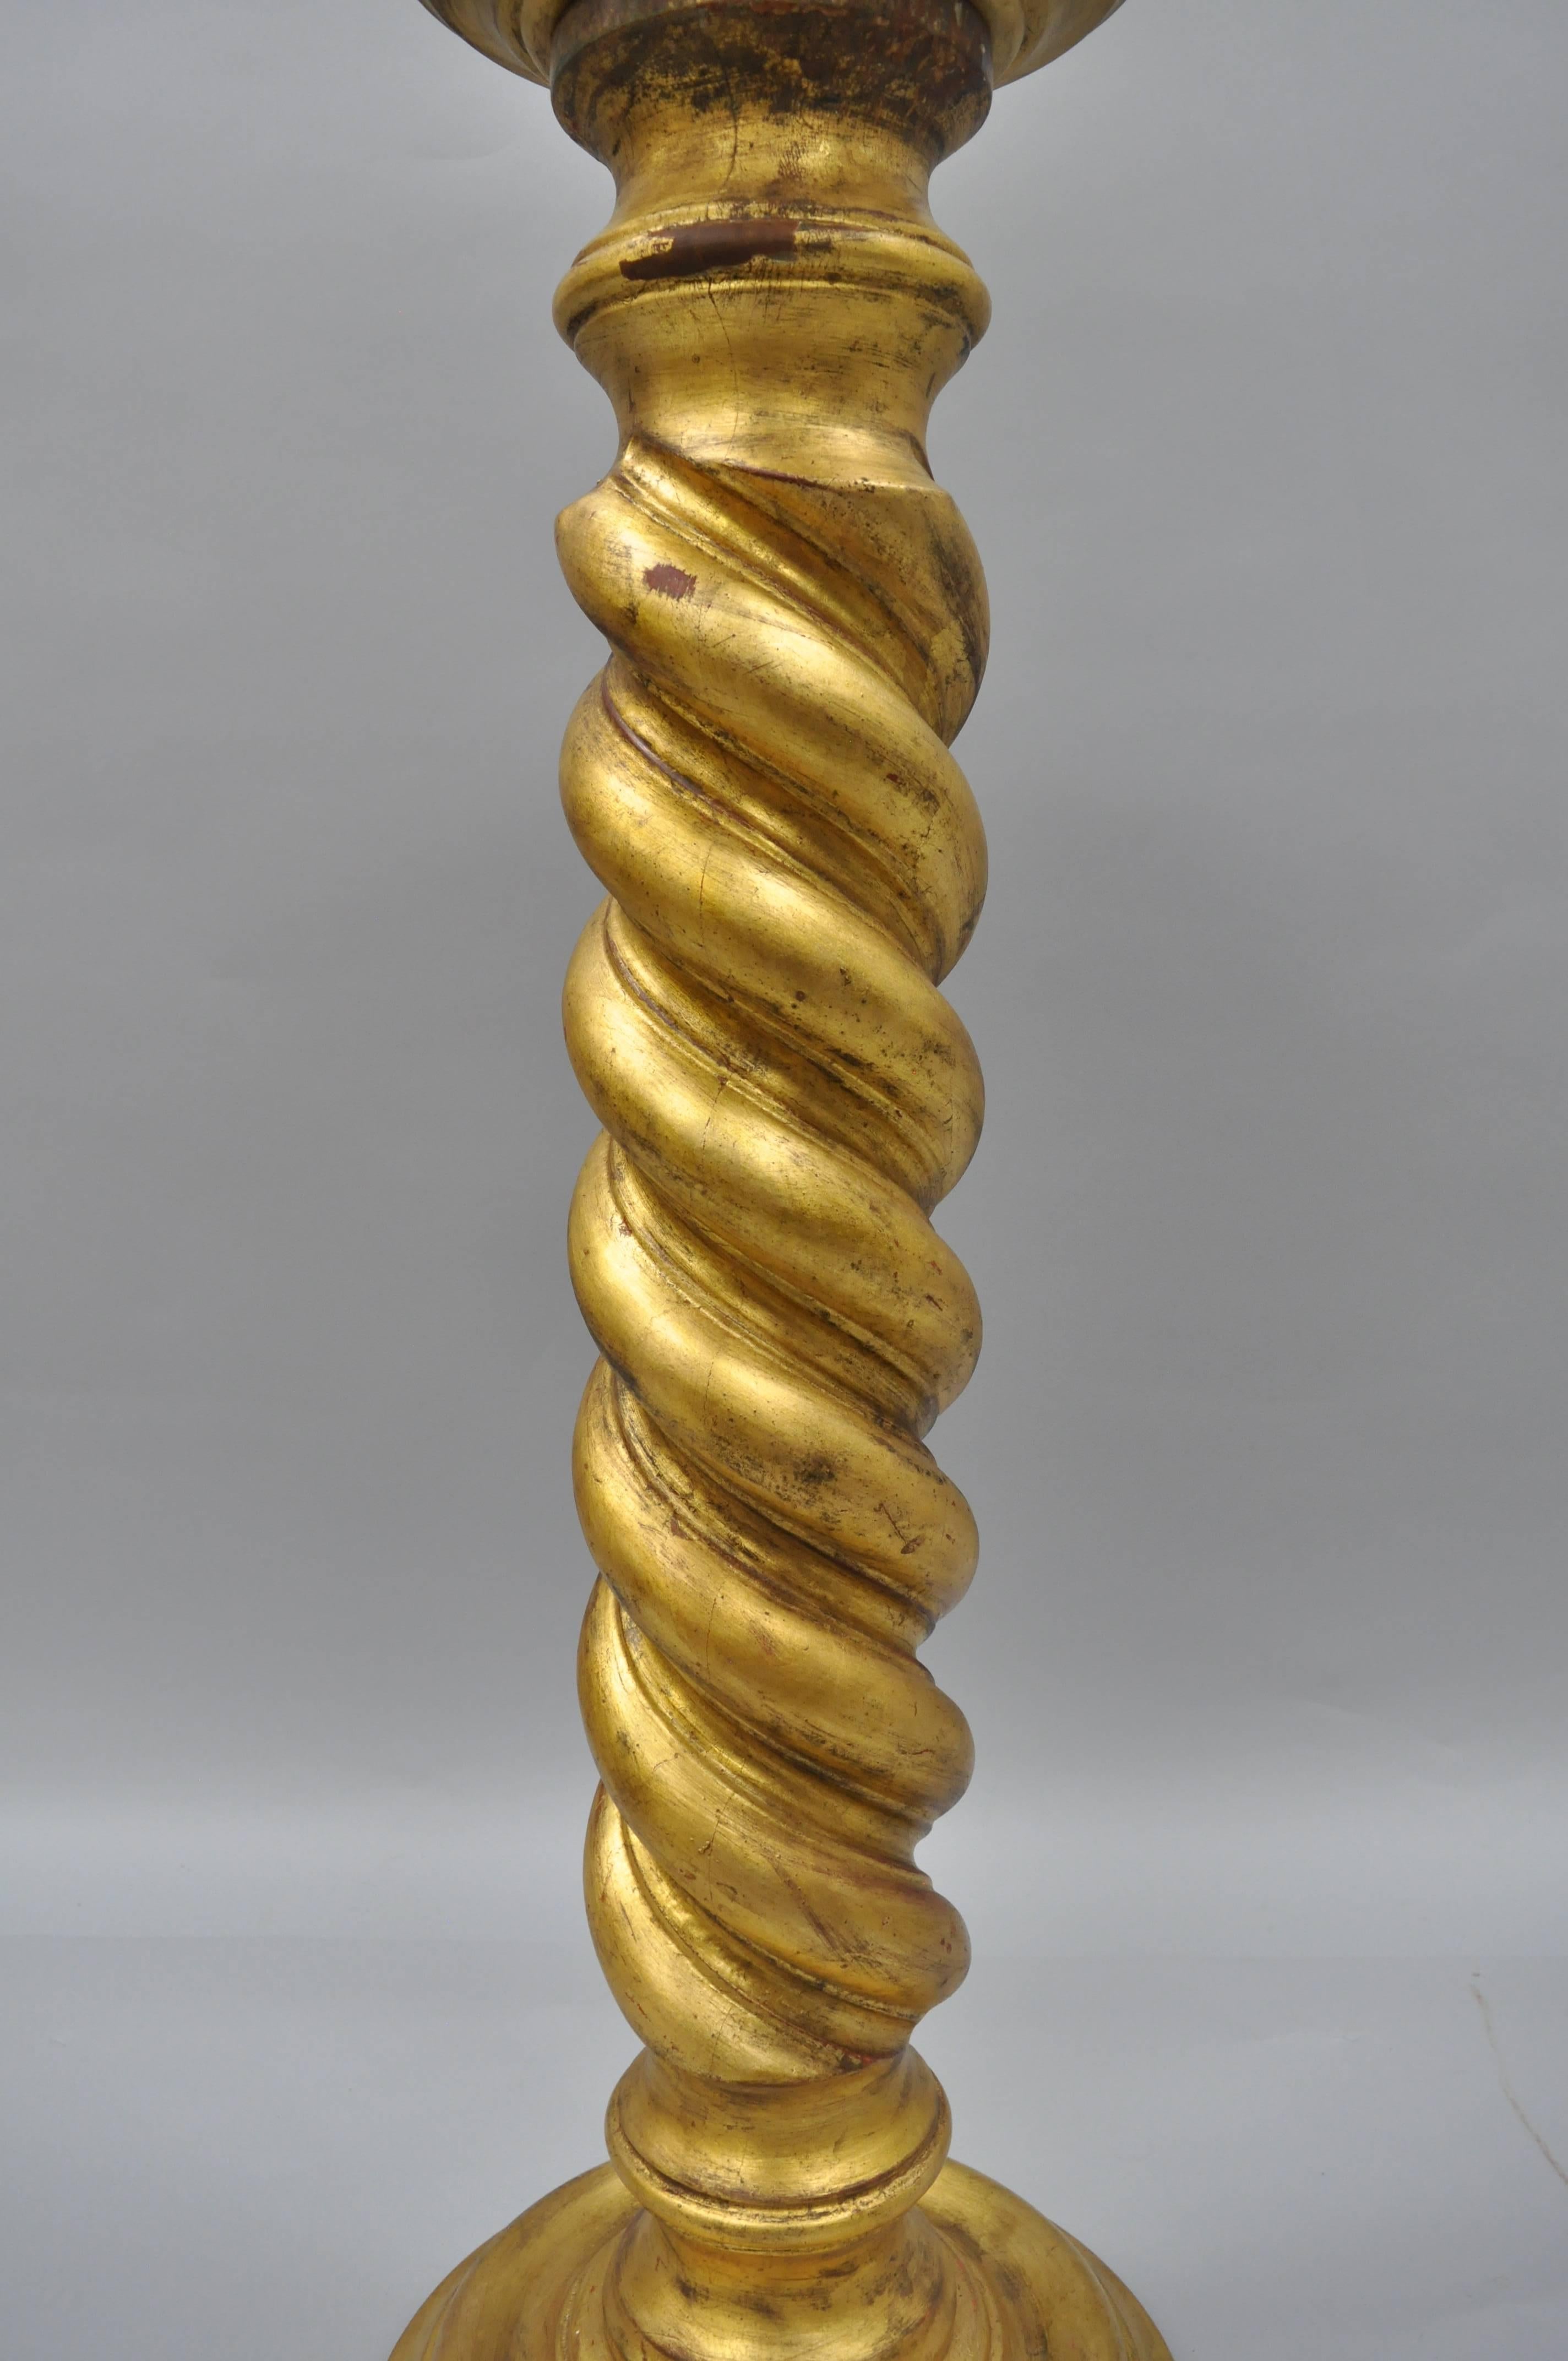 Vintage Italian Solid Carved Wood Gold Leaf Spiral Column Pedestal Stand. Item features a solid wood form, round top, distressed / antiqued gold leaf finish, and pedestal base supported by three feet. Great for statues or as a plant stand. 39"H